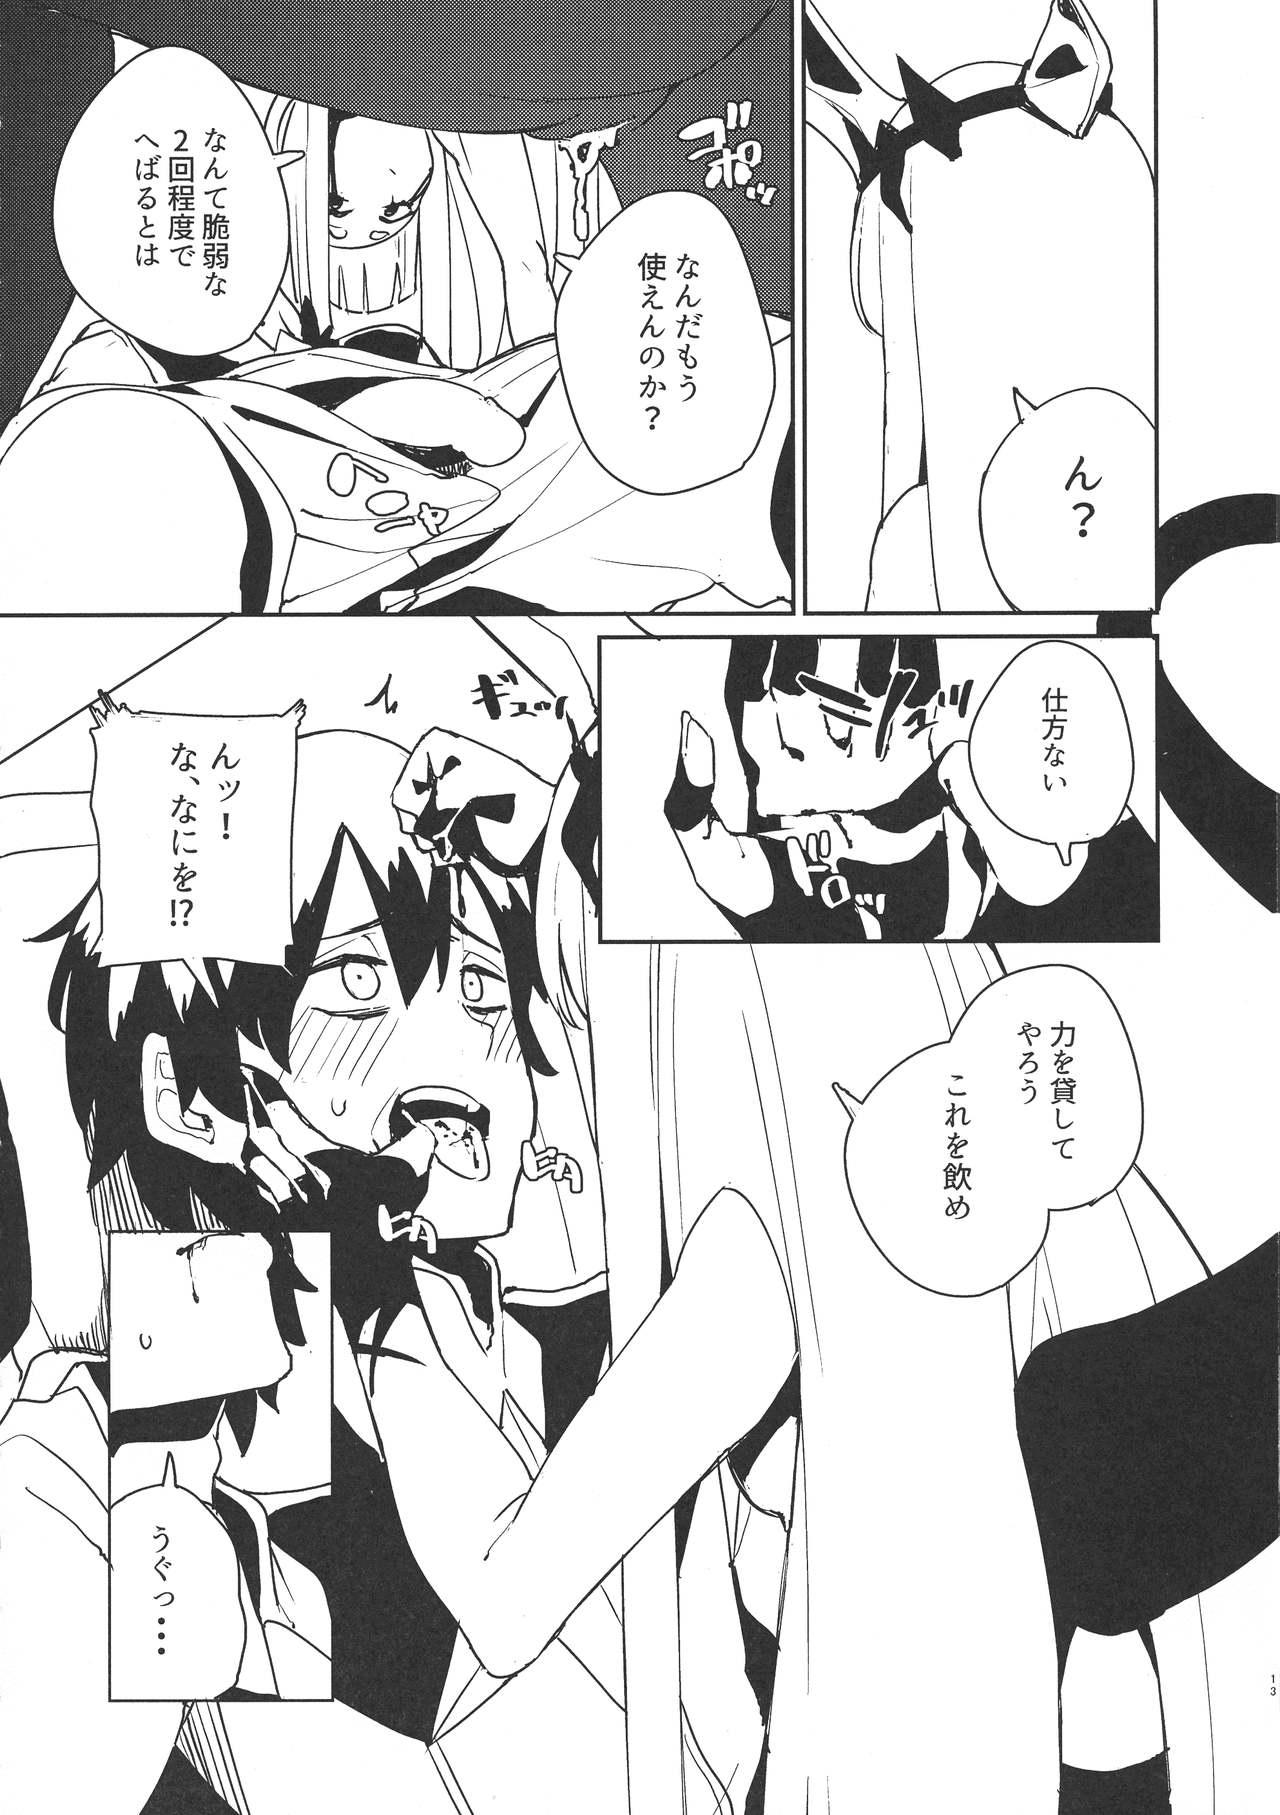 Tesao Darling in the princess - Darling in the franxx Softcore - Page 12